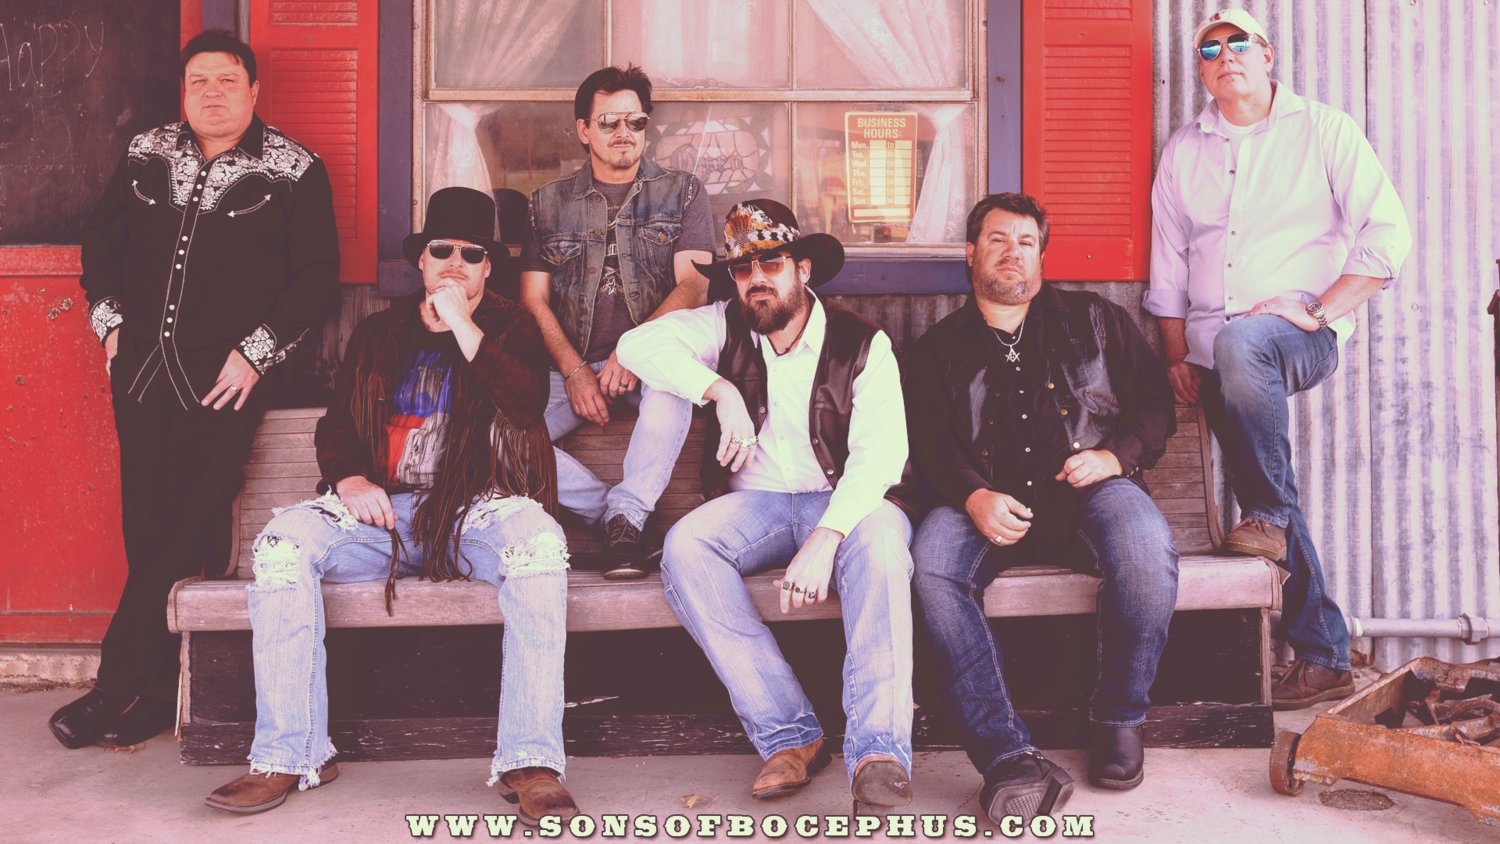 Sons of Bocephus: A Tribute to Hank Jr. will perform at 1 p.m.